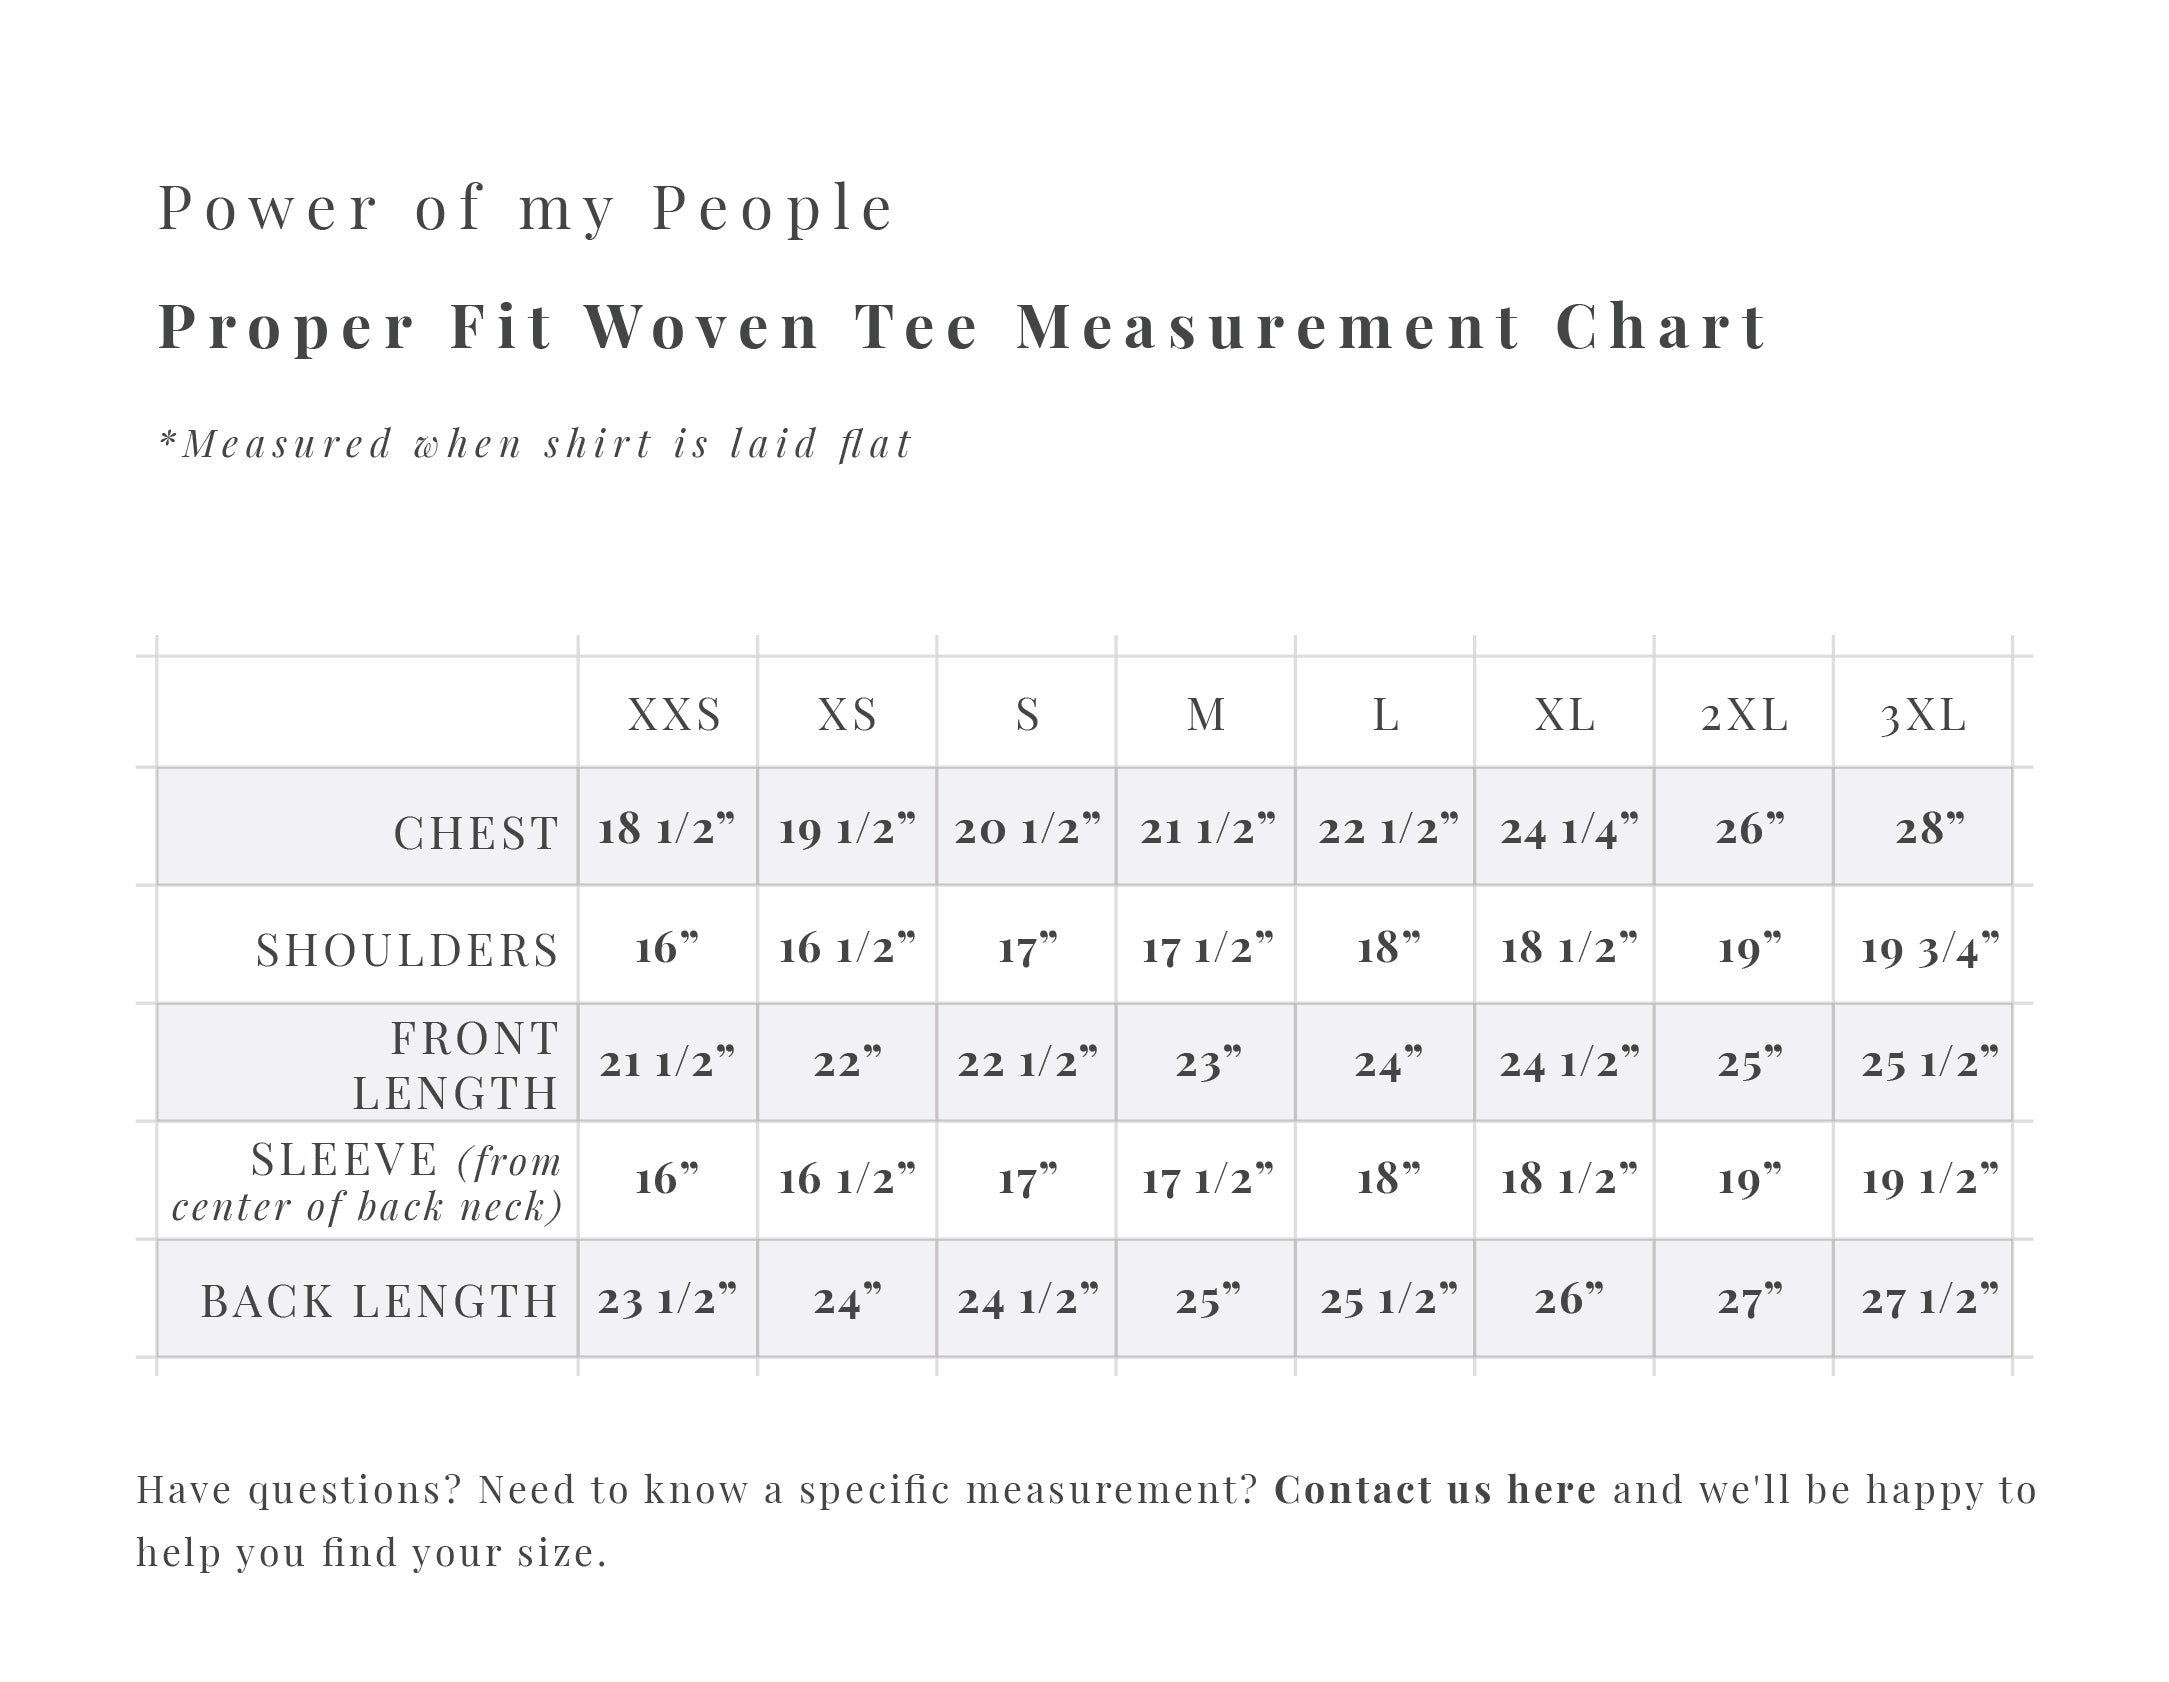 Proper Fit Woven Tee Size Chart